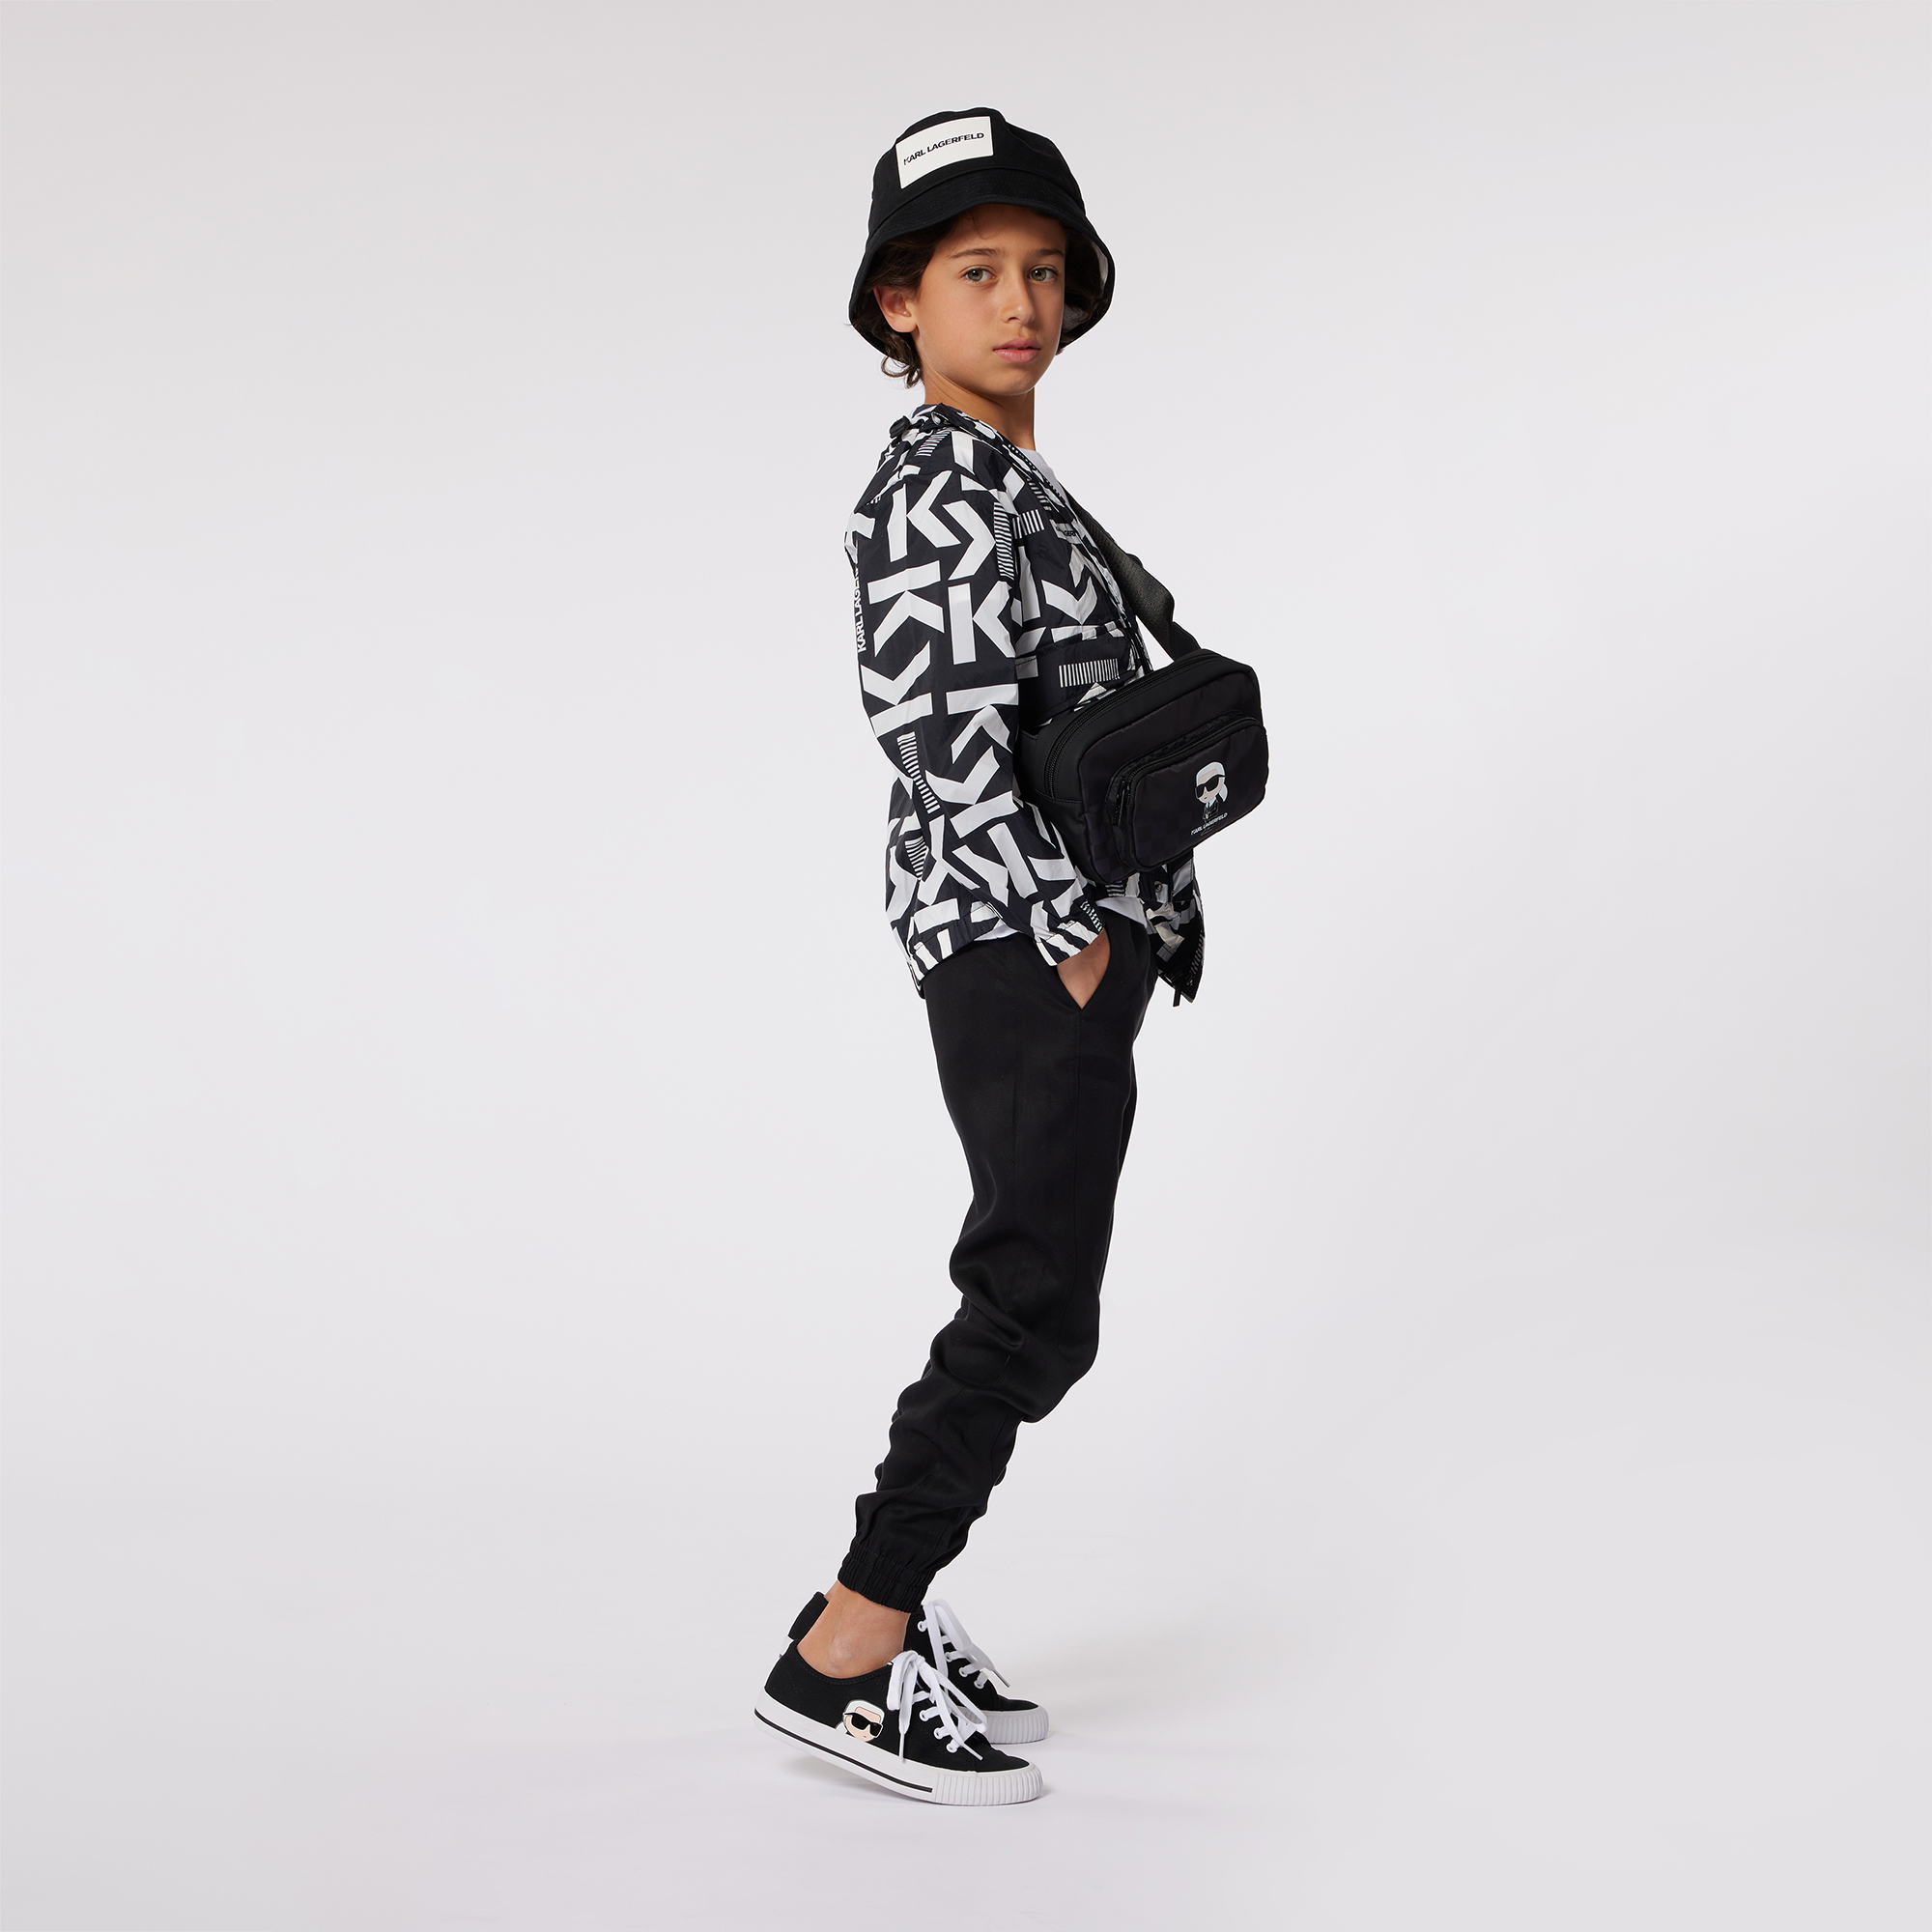 Trousers with pockets KARL LAGERFELD KIDS for BOY